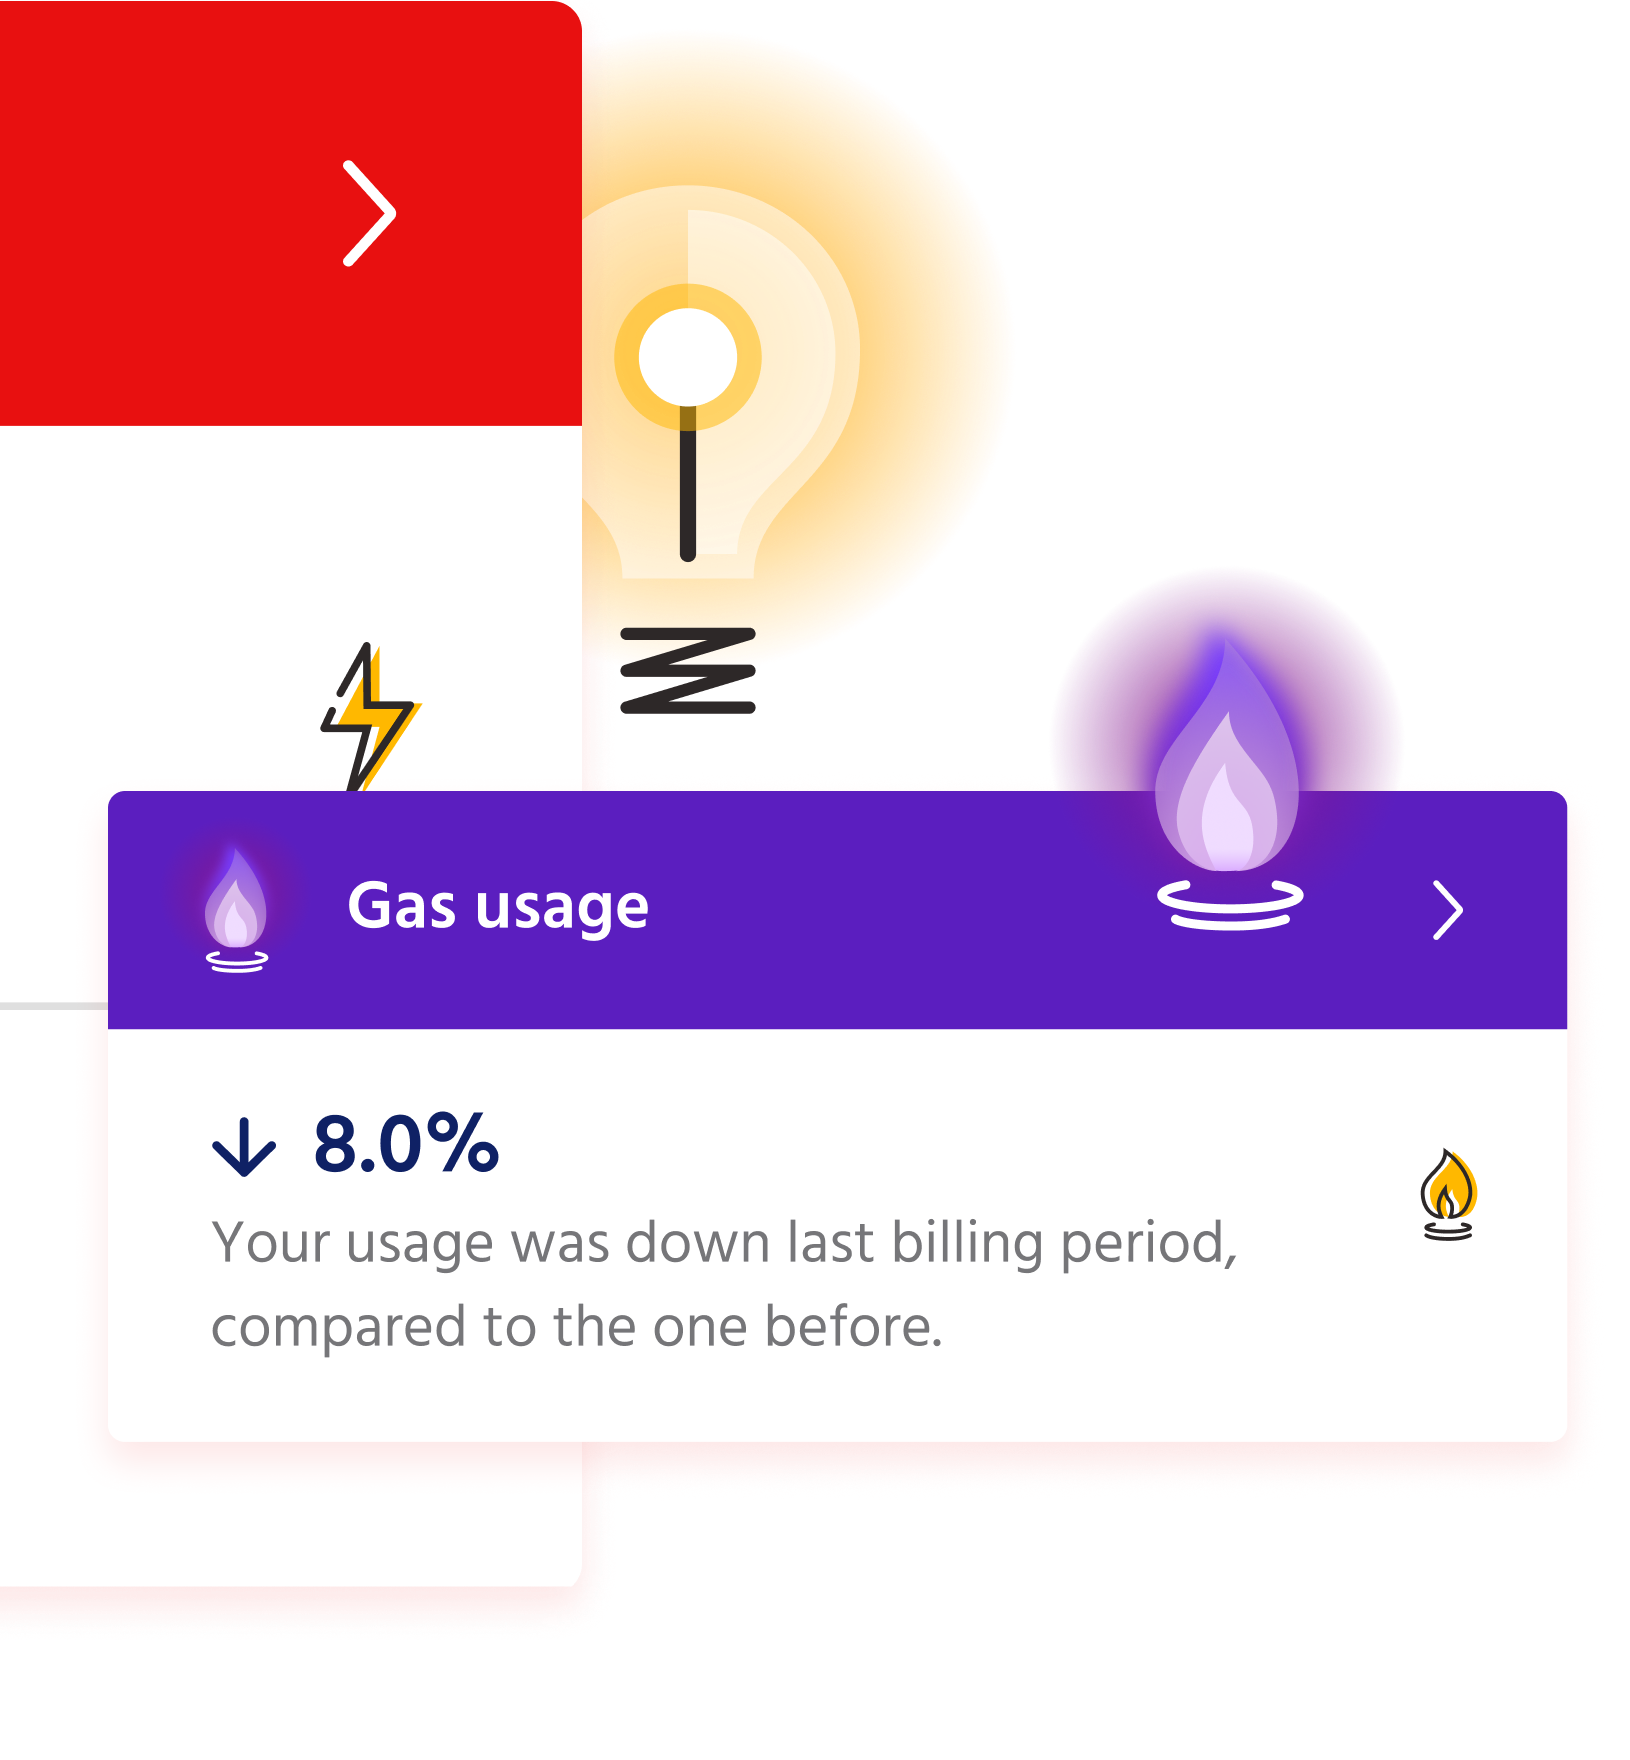 A component showing the gas usage and the usage stats compared to the previous billing period in front of a component showing the electricity usage.